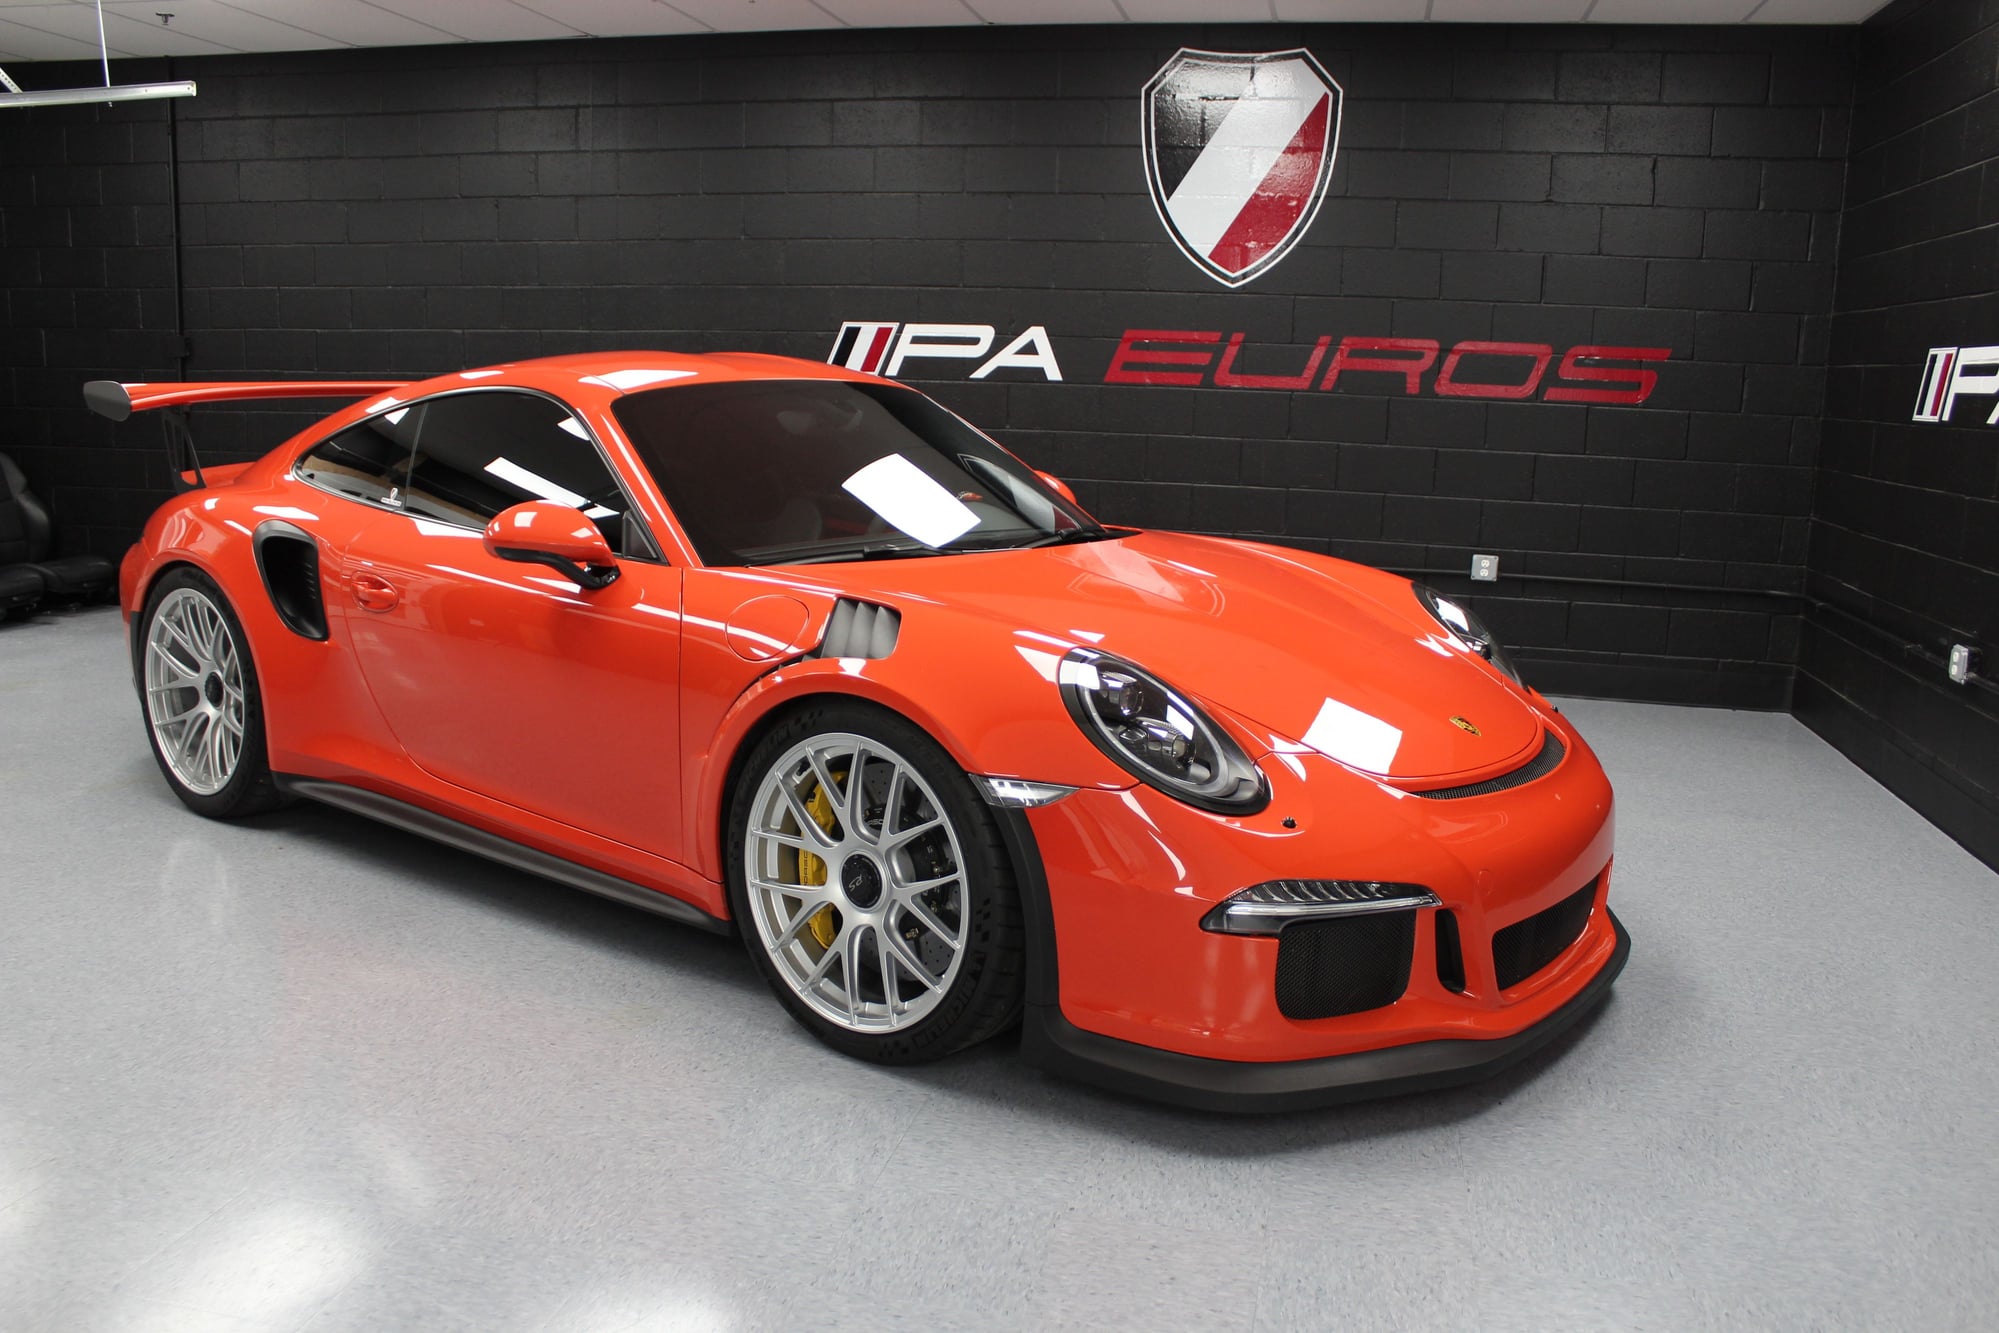 2016 Porsche 911 - 2016 GT3 RS 991.1 Lava Orange, Full Leather, FAL, PCCBs + CPO Warranty - Used - VIN WP0AF2A93GS192069 - 21,310 Miles - 6 cyl - 2WD - Automatic - Coupe - Orange - Exton, PA 19341, United States